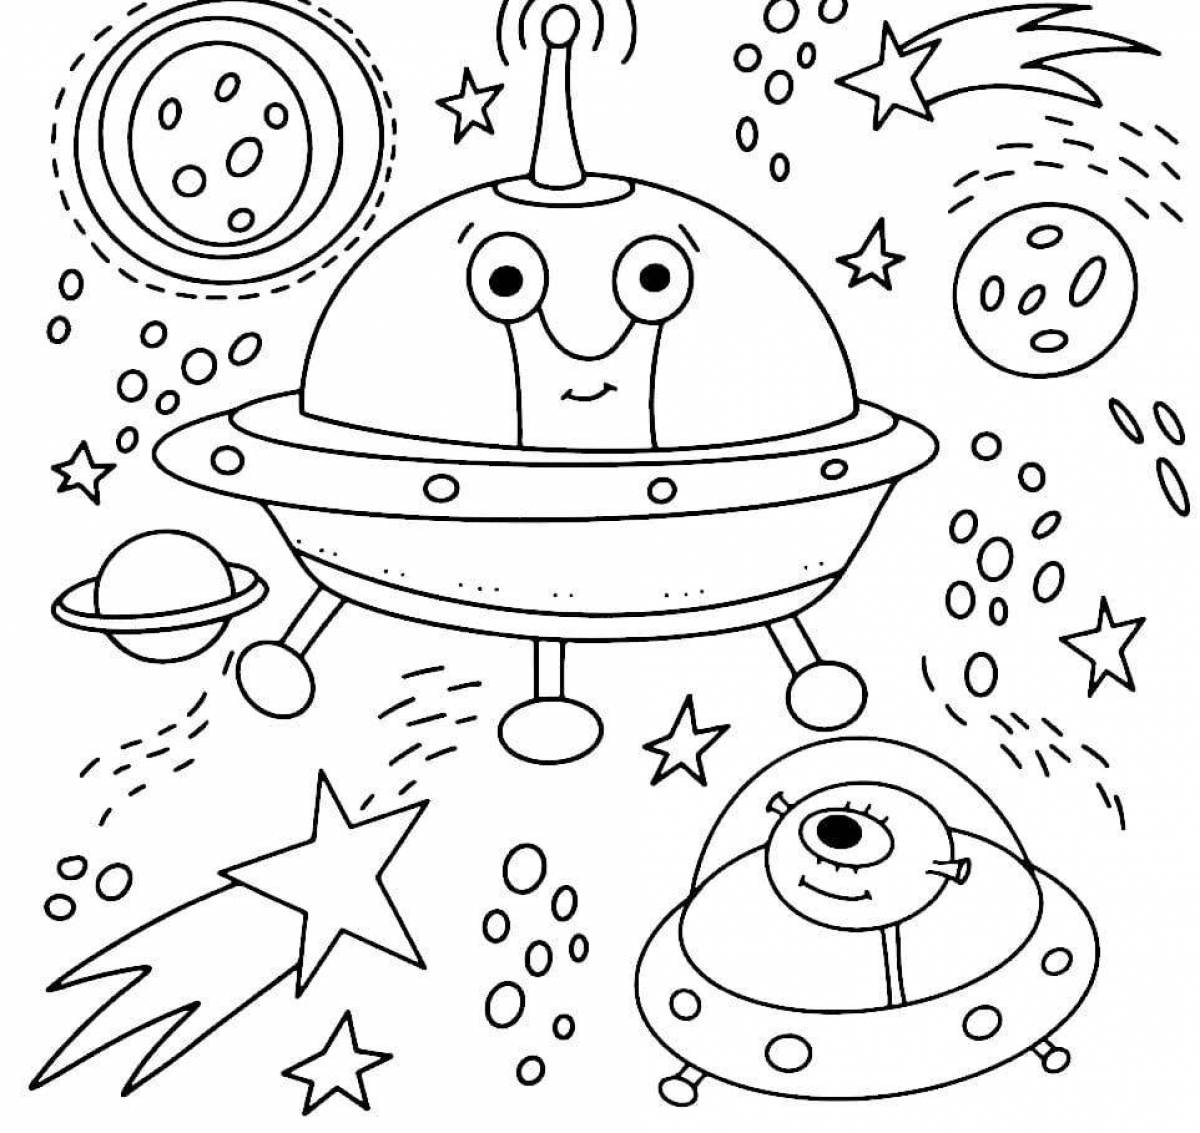 Amazing space coloring book for 6-7 year olds